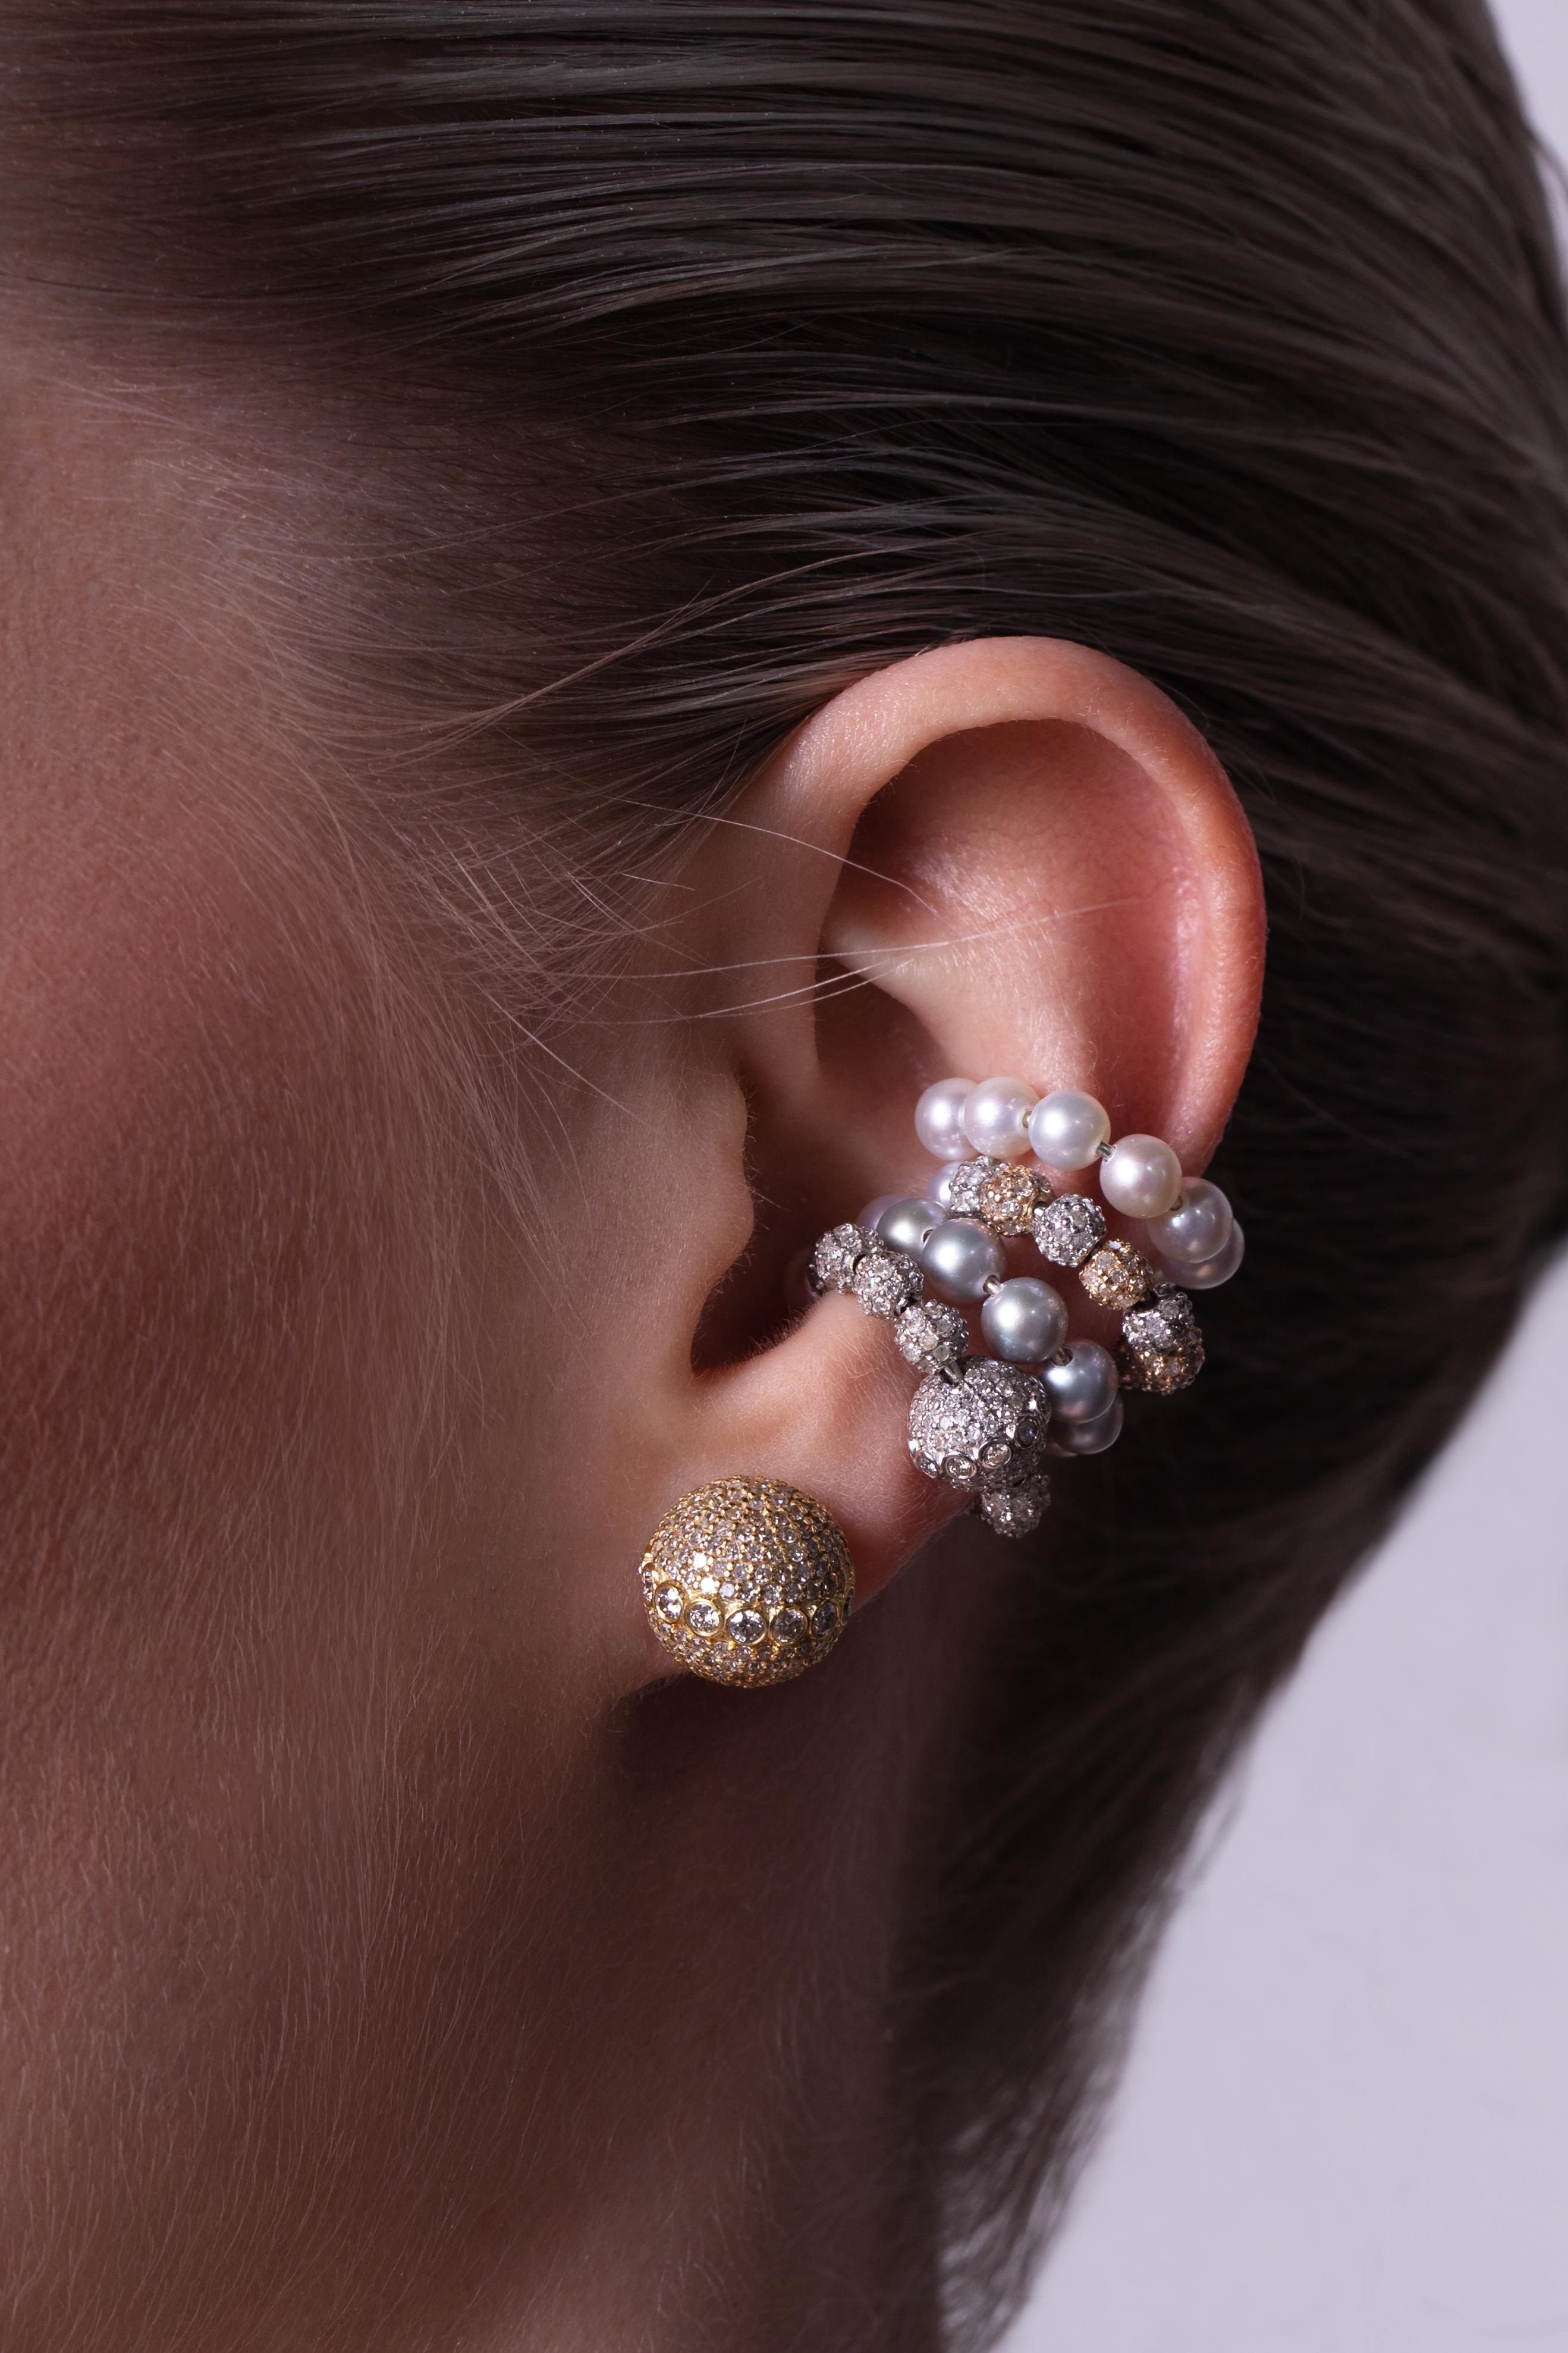 A design classic from THEVAULT15. This ear cuff is made of lustrous high-quality AAA white Akoya pearls, making it a beautiful addition to any collection. Wear it stacked with one of our other beautiful cuffs.

Style Details

AAA white Akoya